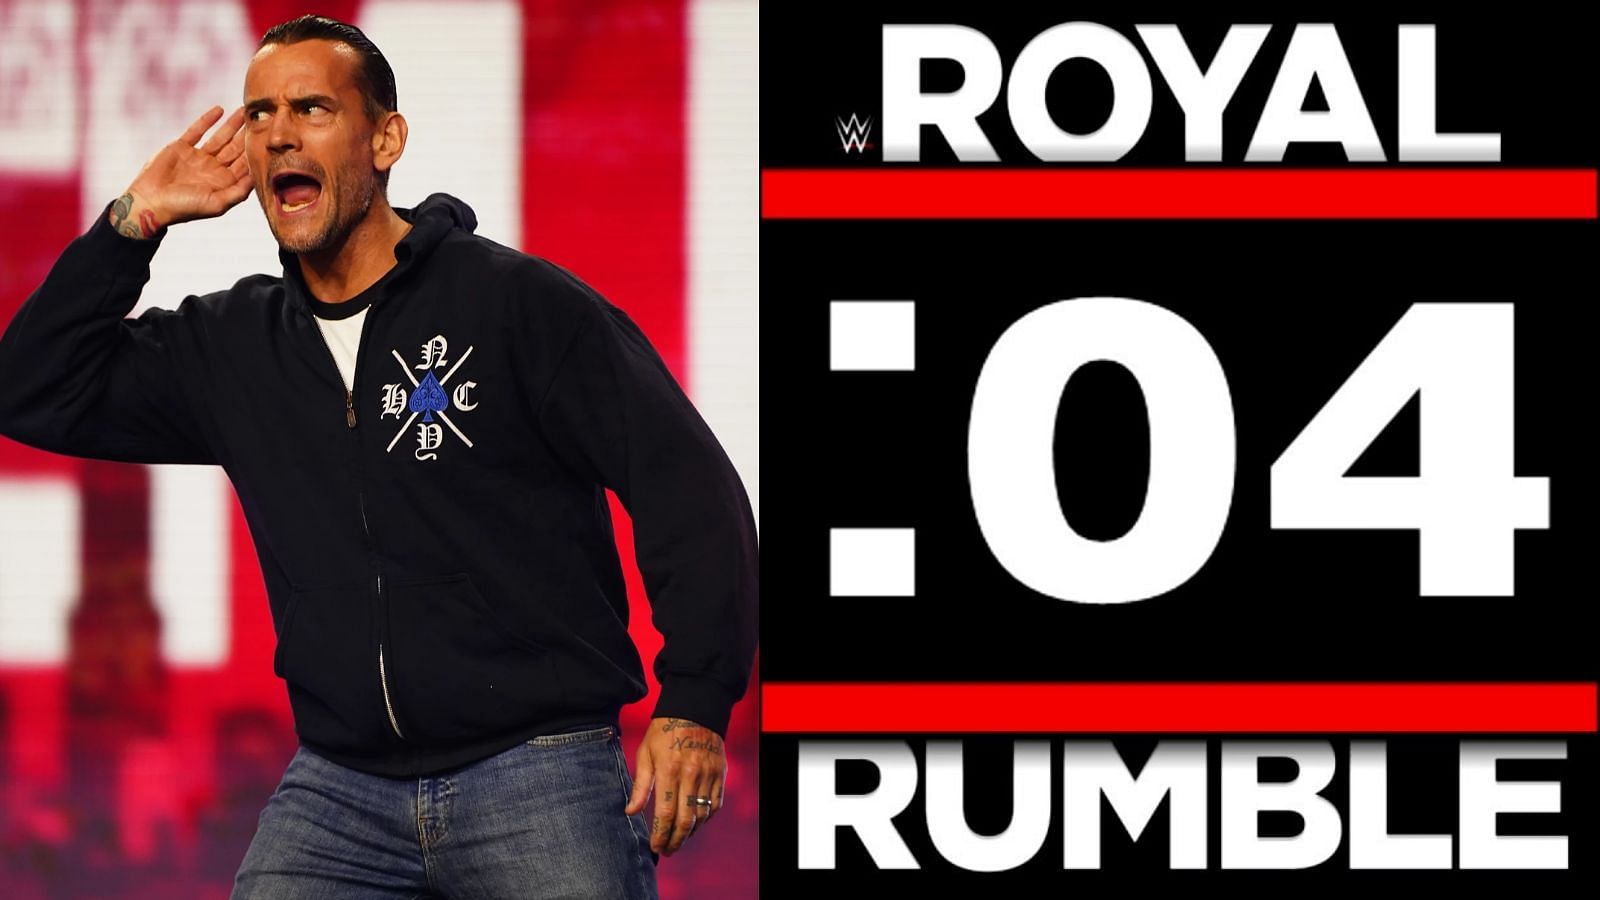 Quite a number of AEW stars have appeared in Royal Rumbles over the years.